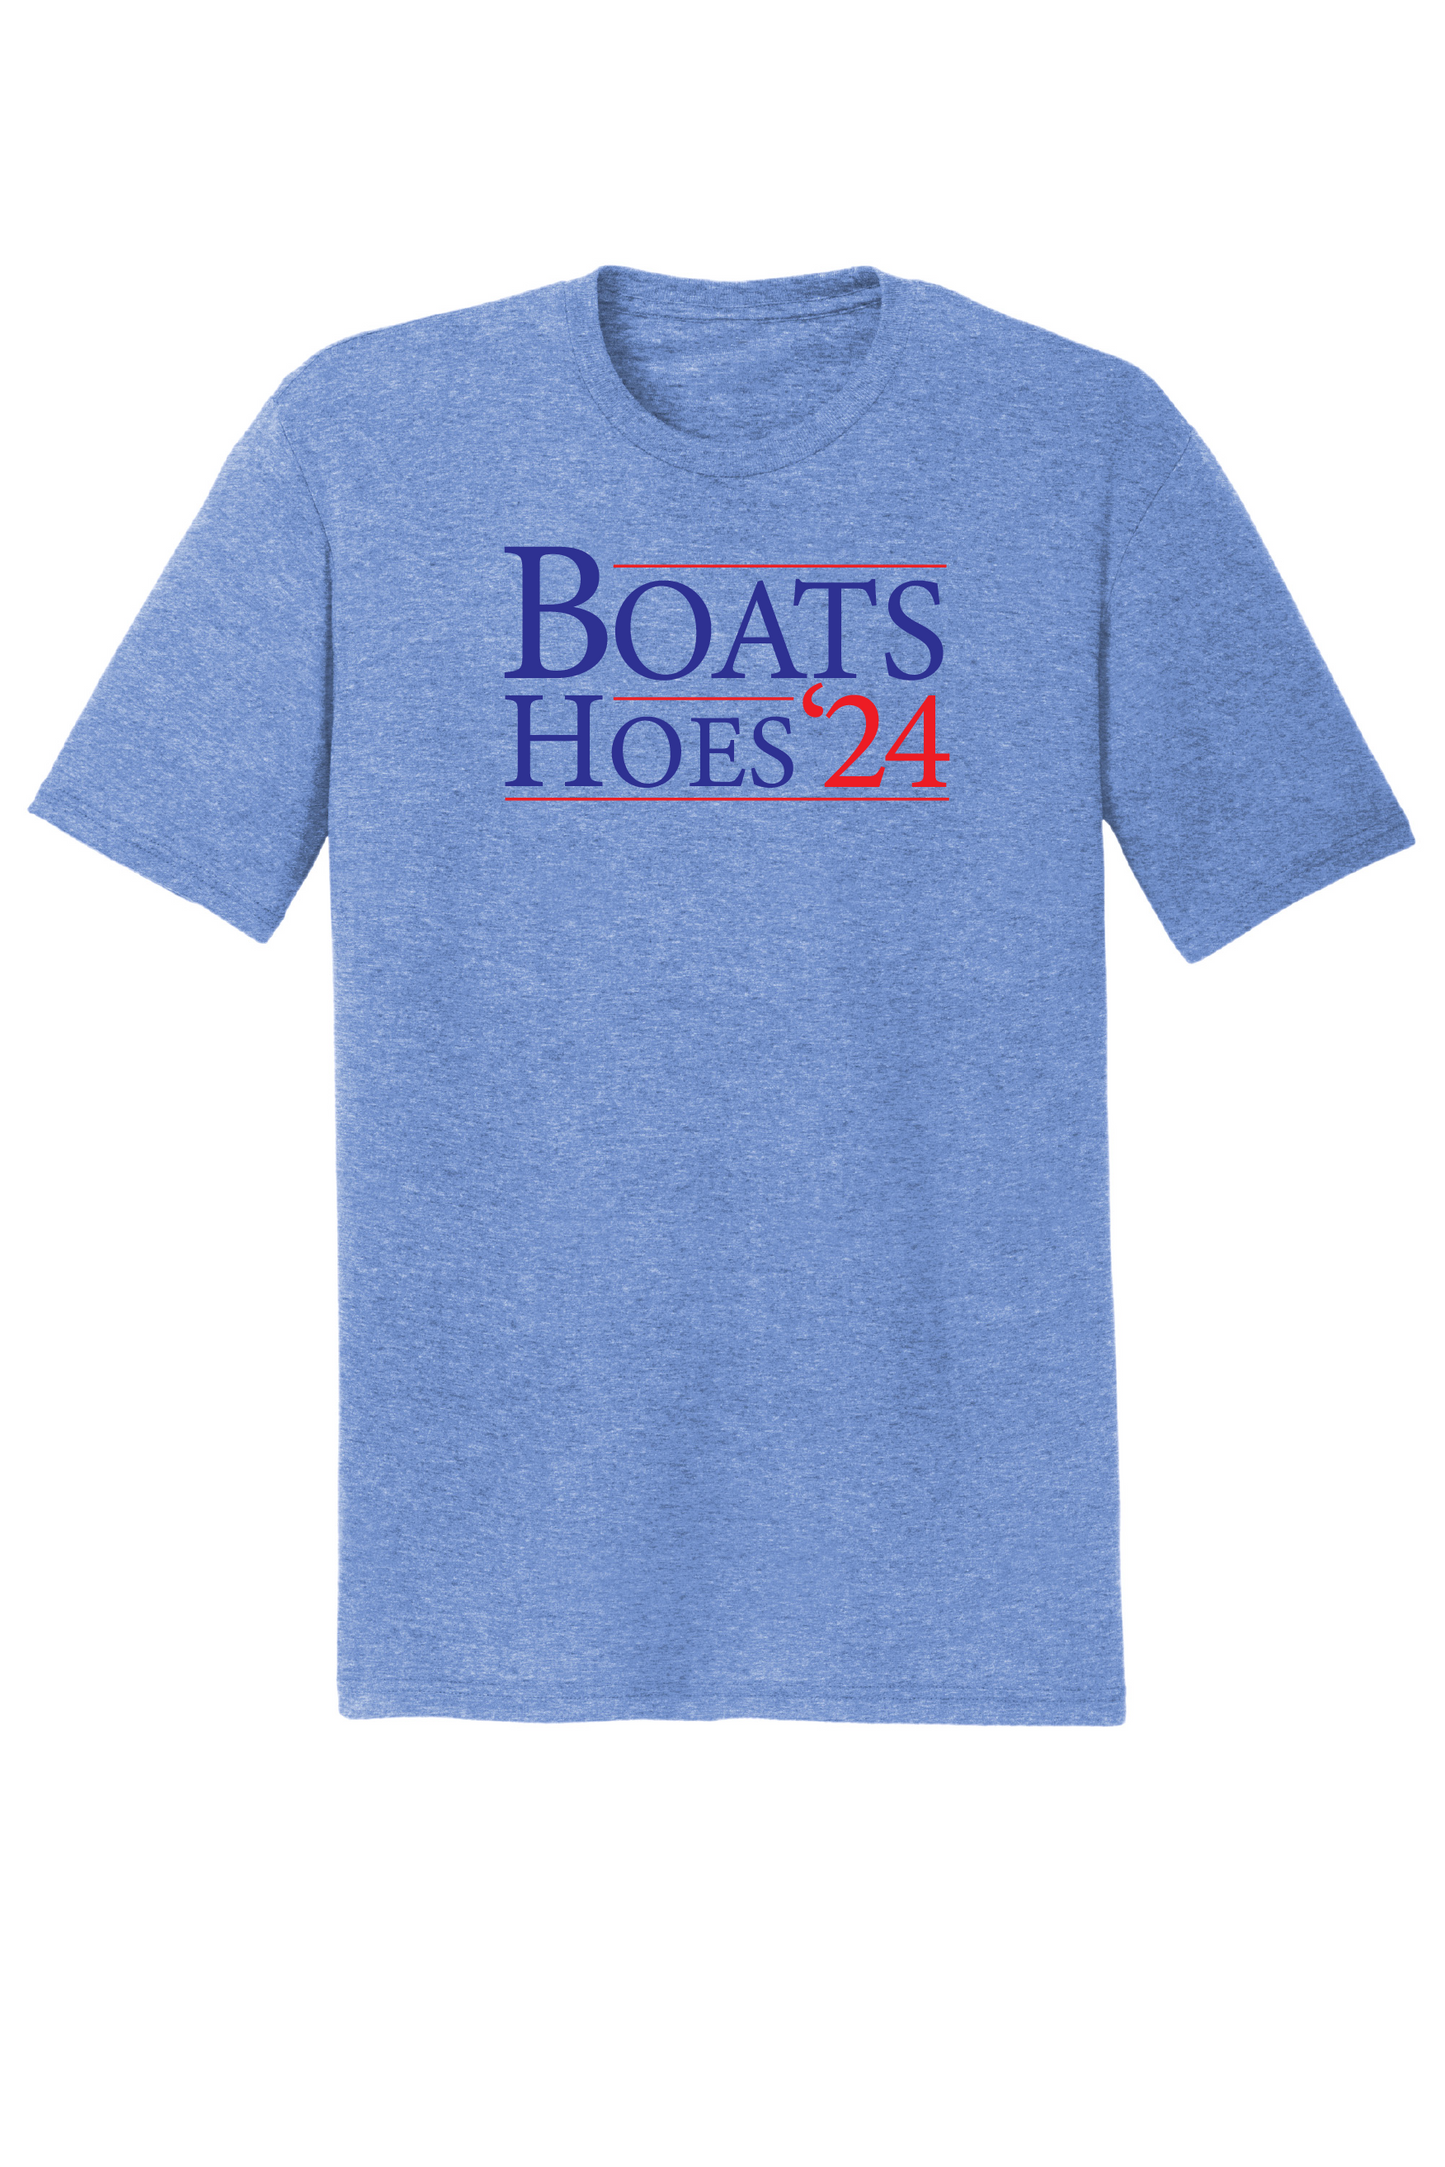 Boats Hoes '24 Tee